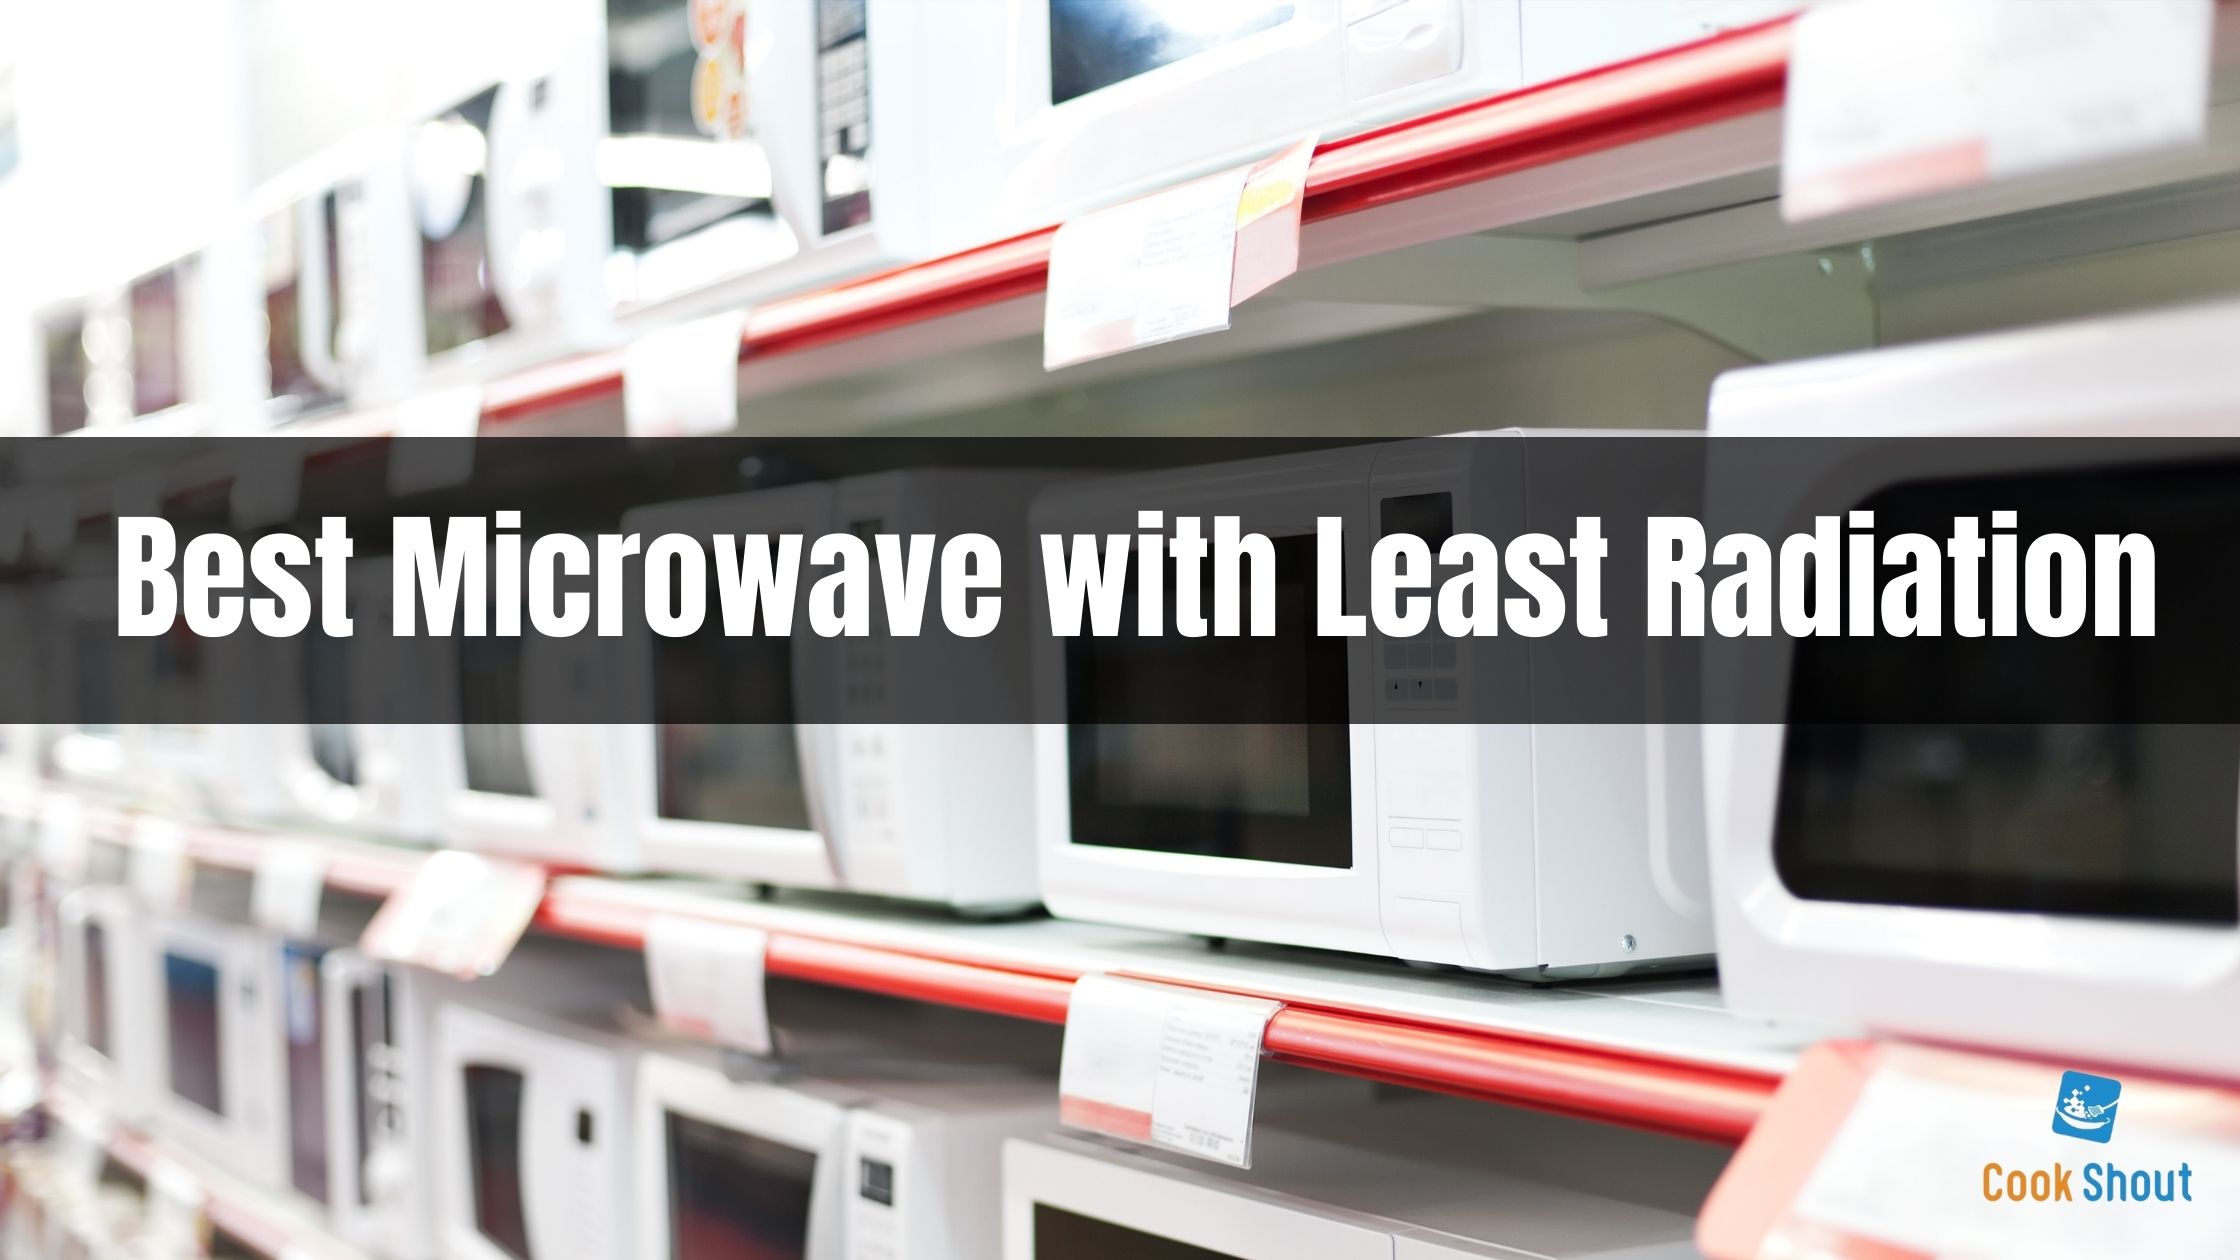 Best Microwave with Least Radiation